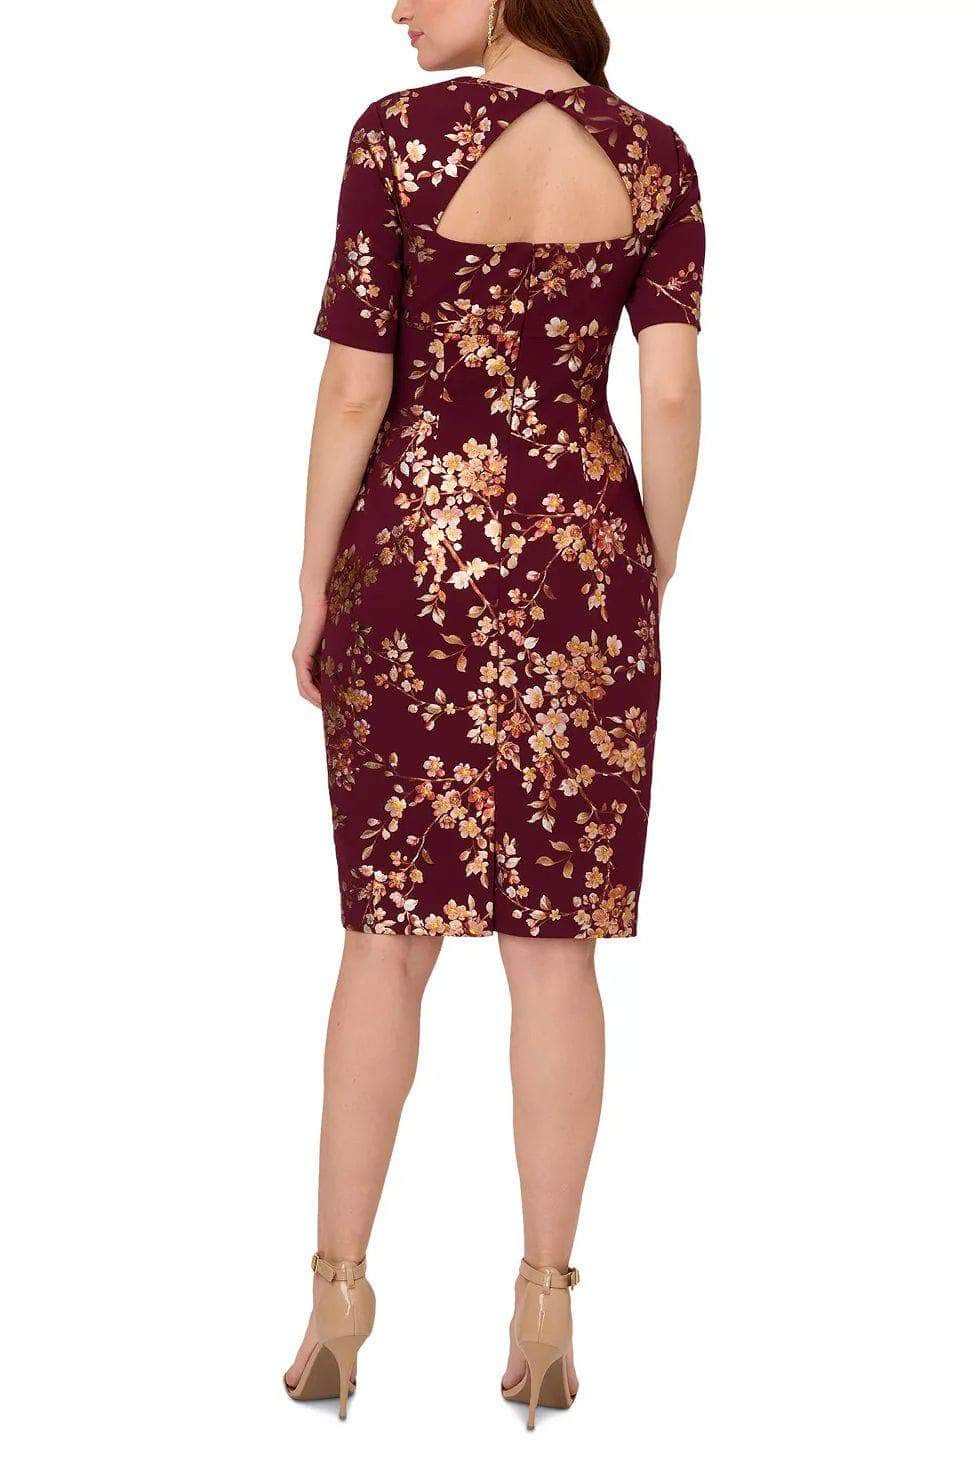 Adrianna Papell AP1D105078 - Square Neck Printed Cocktail Dress